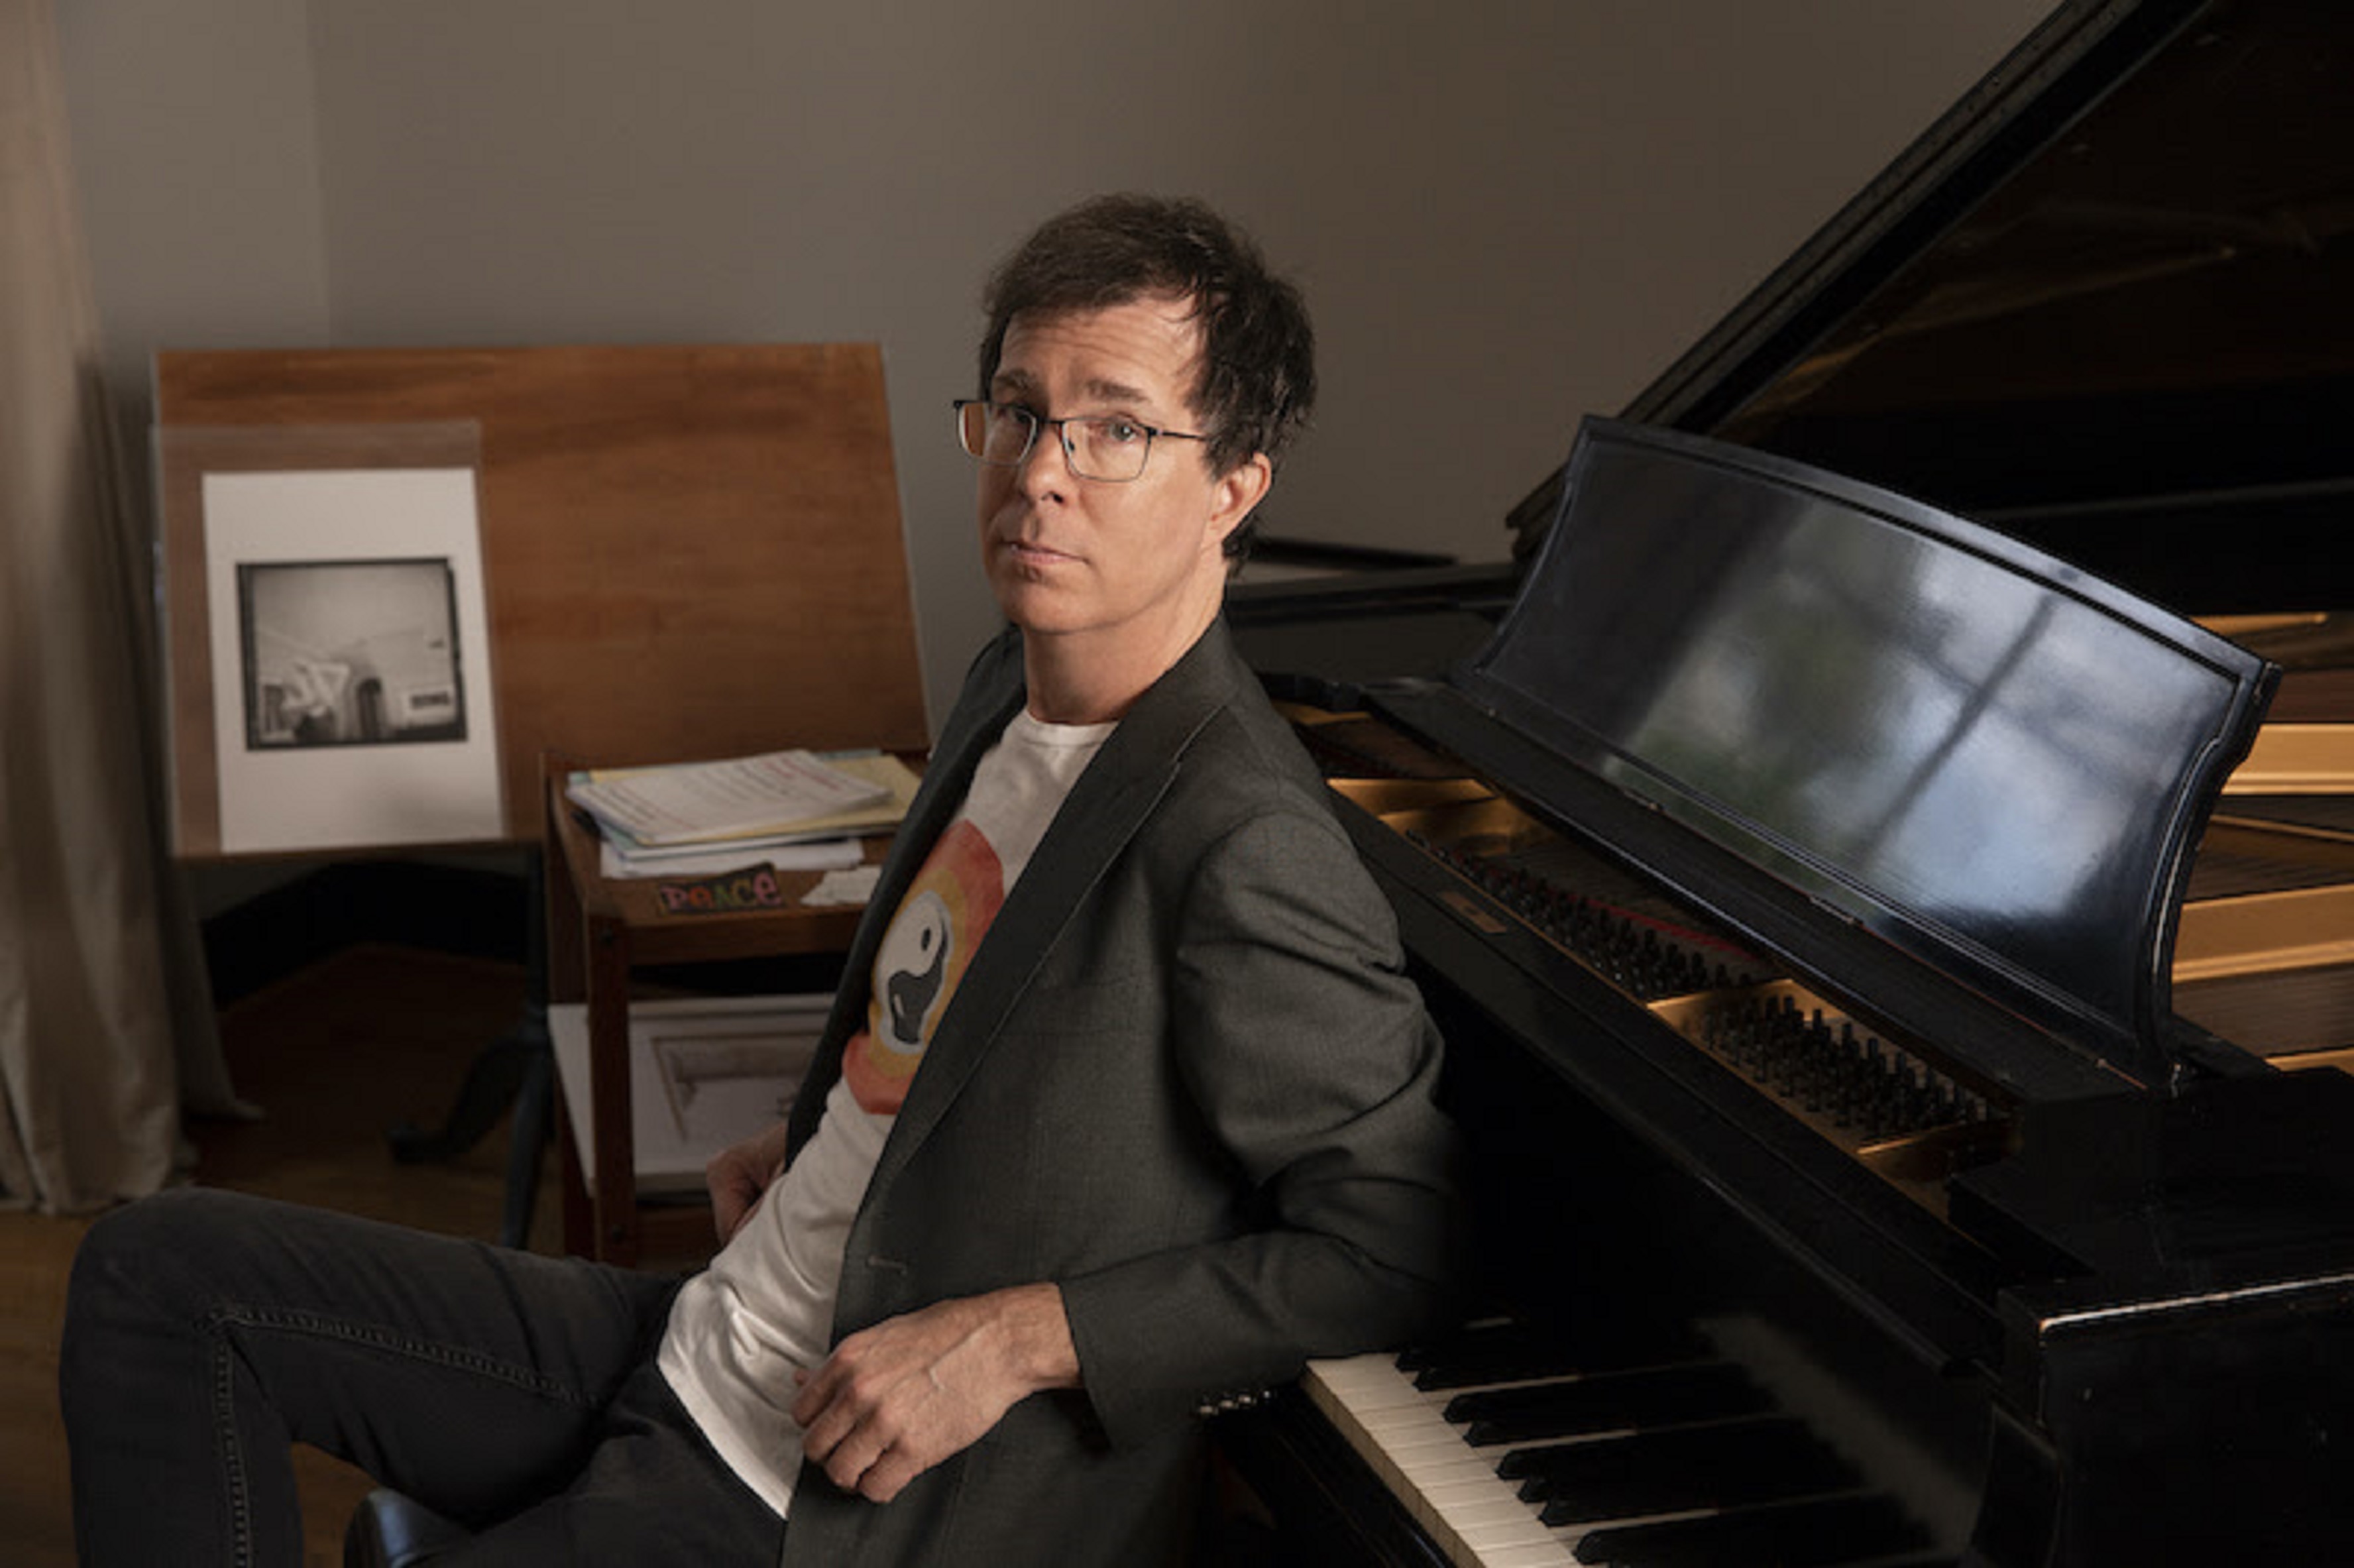 Ben Folds To Release "What Matters Most" June 2 Via New West Records - Shares "Winslow Gardens"